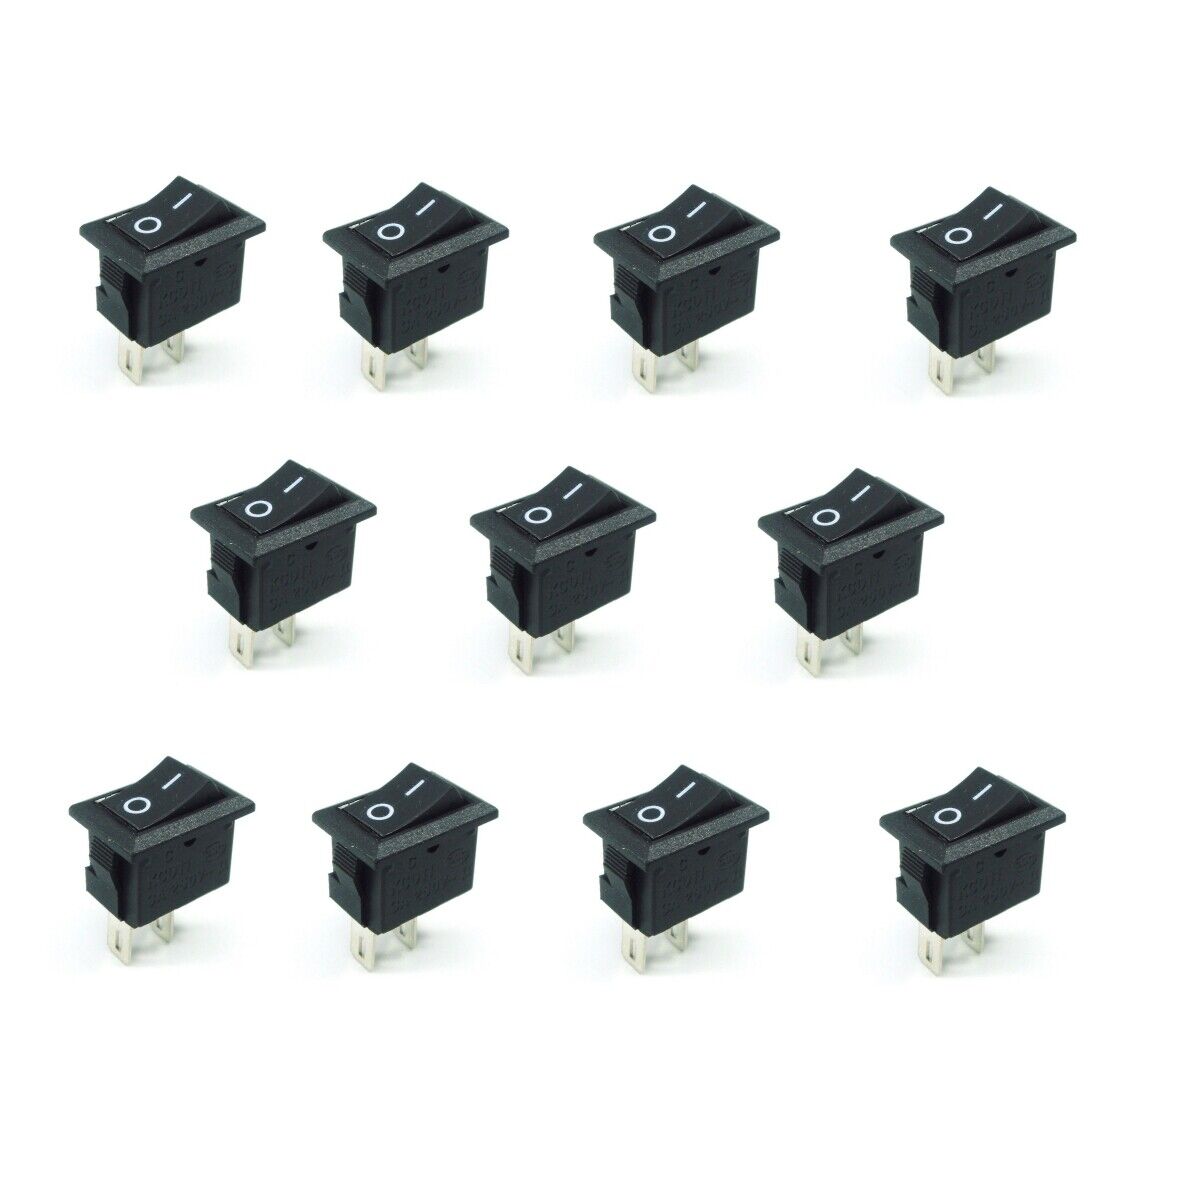 10x Lot On/Off Black Square Rocker 12V DC Switches for Car/Truck/Boat/Motorcycle